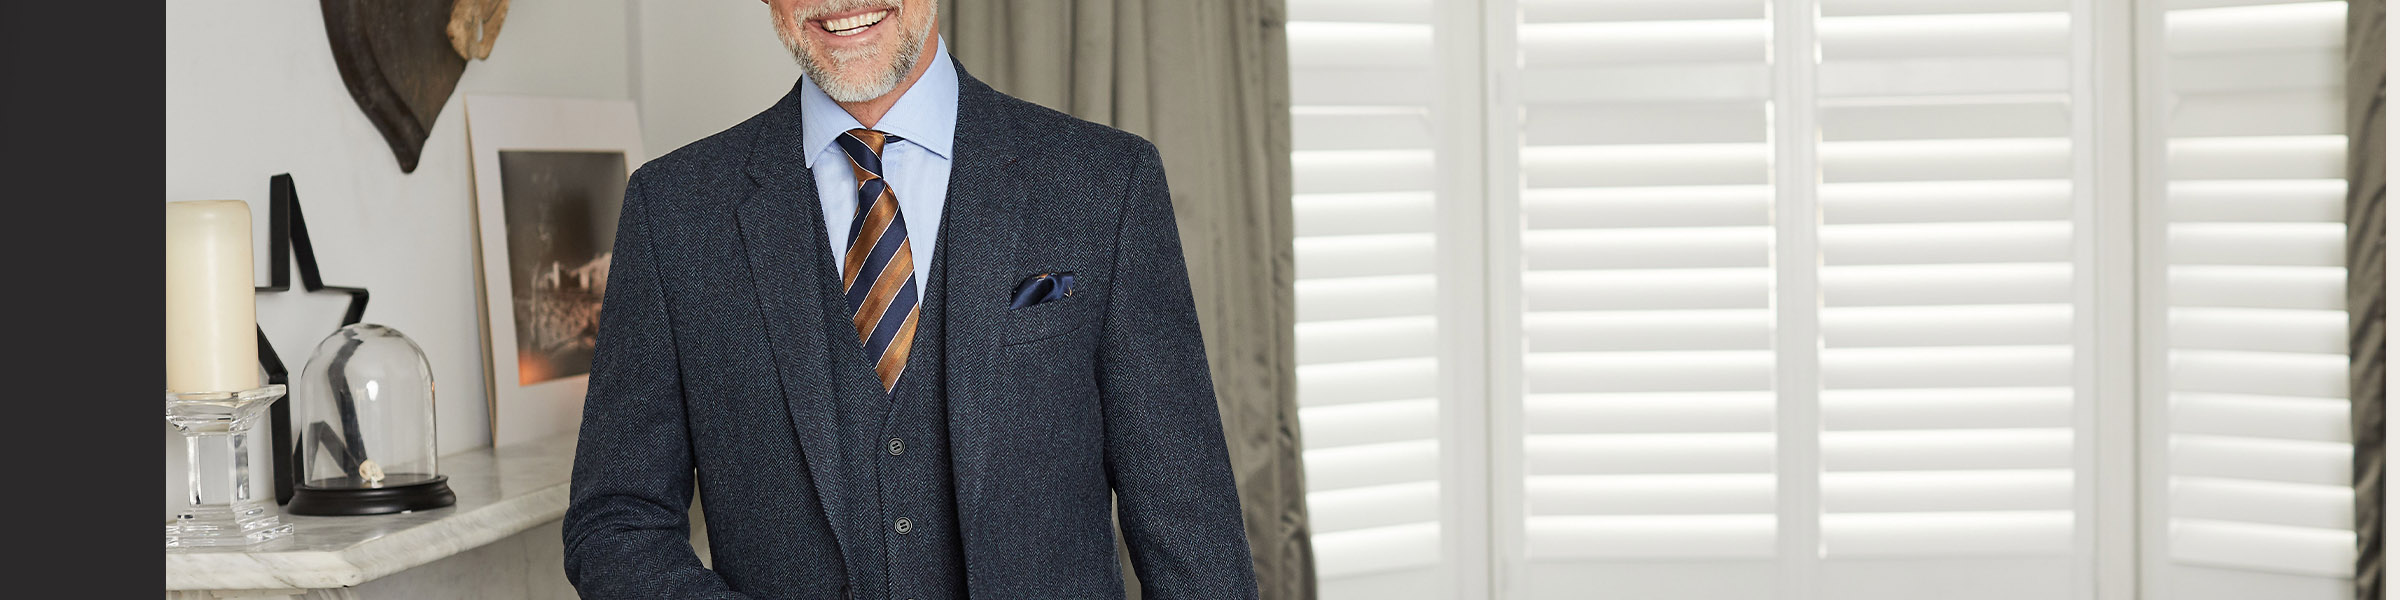 How to Wear a Three Piece Suit